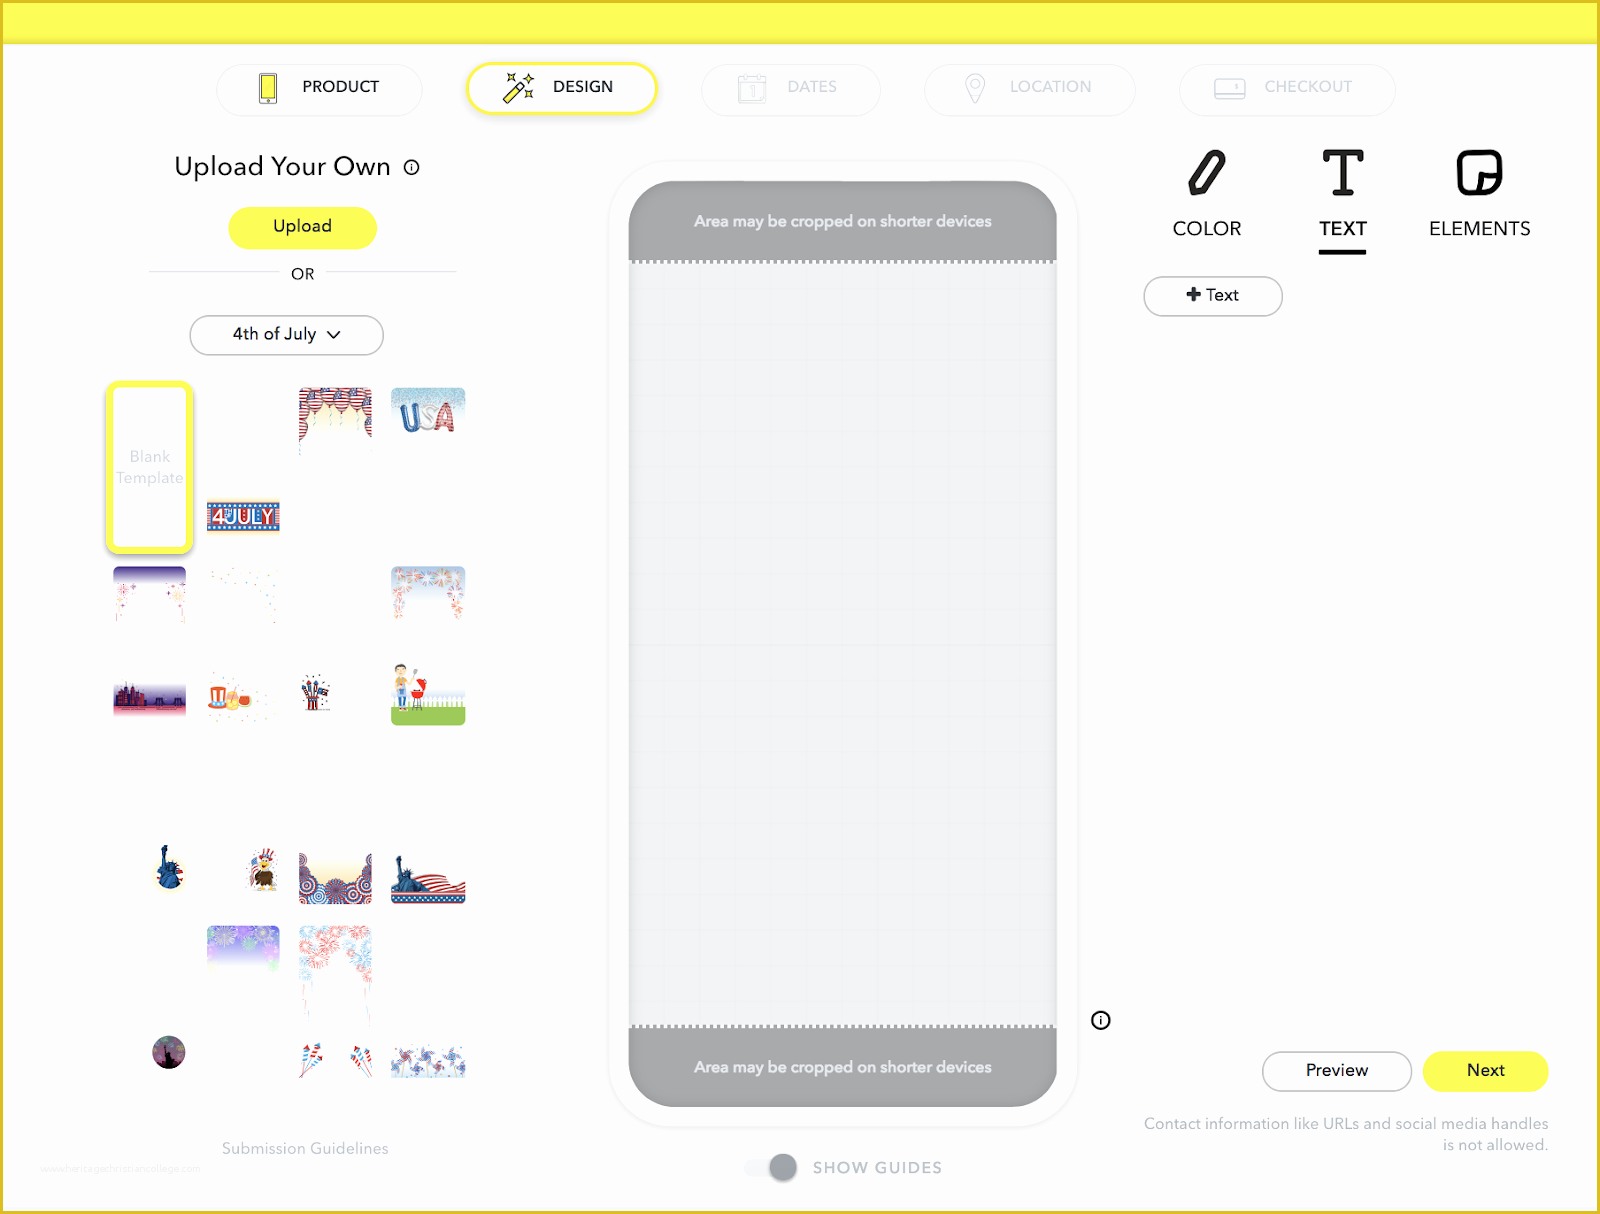 Free Snapchat Geofilter Template Of How to Use Snapchat Geofilters to Improve Your Marketing